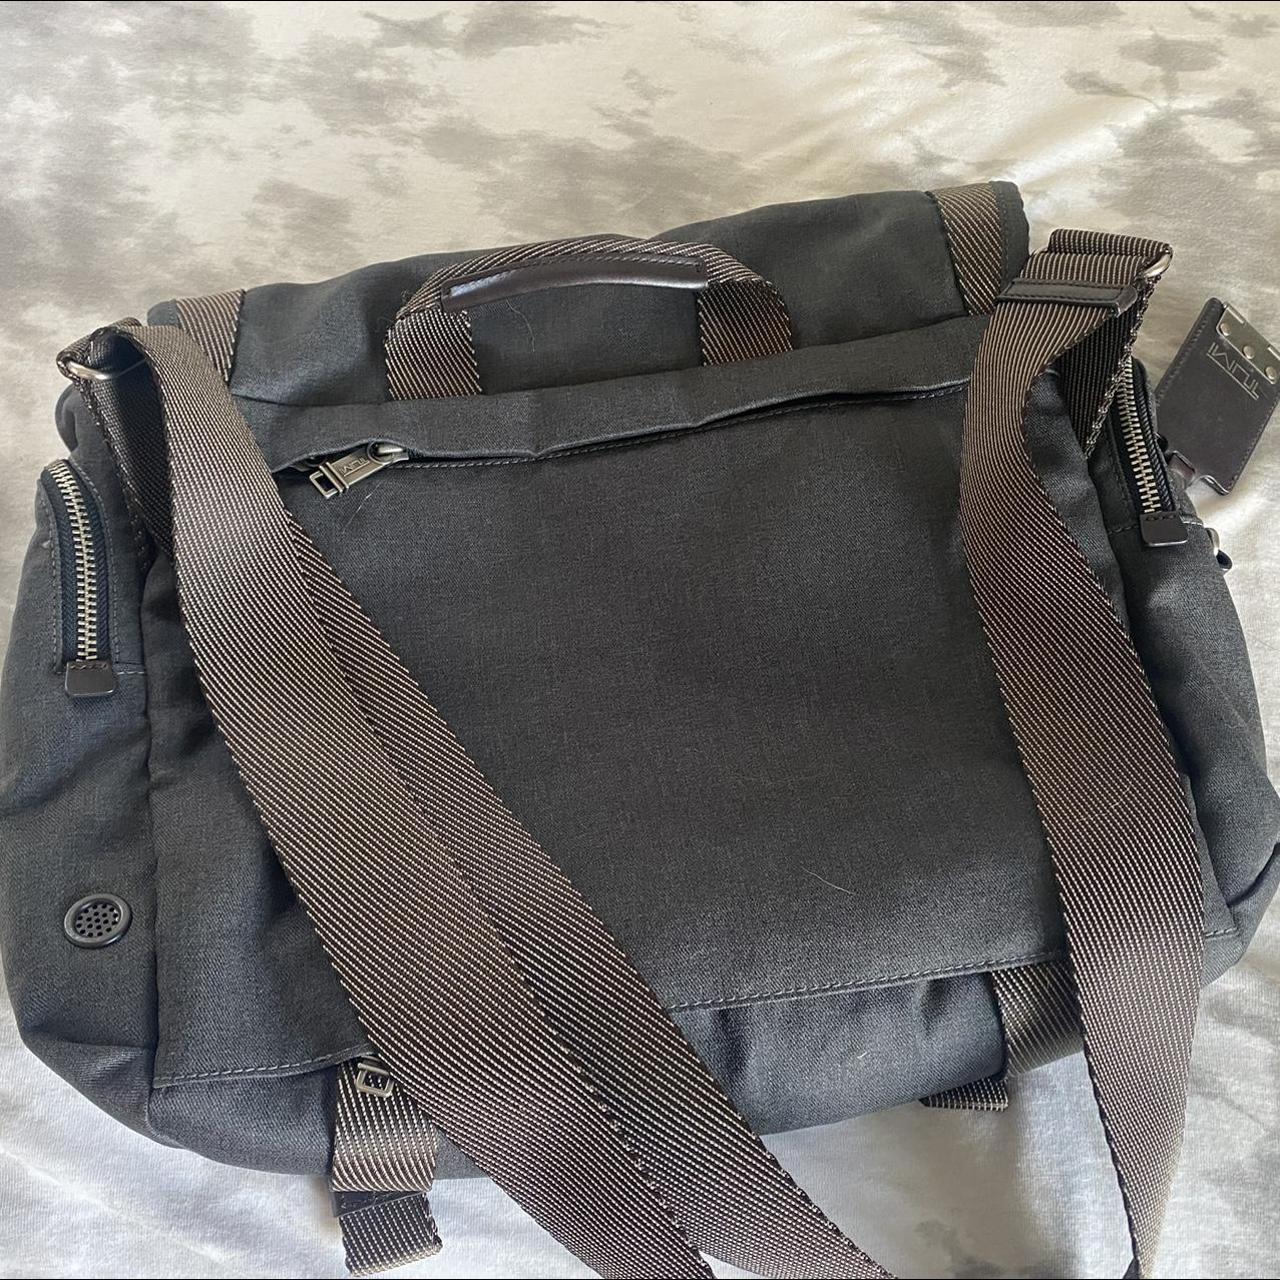 Product Image 4 - Tumi Messenger Bag

Like new condition

Lots